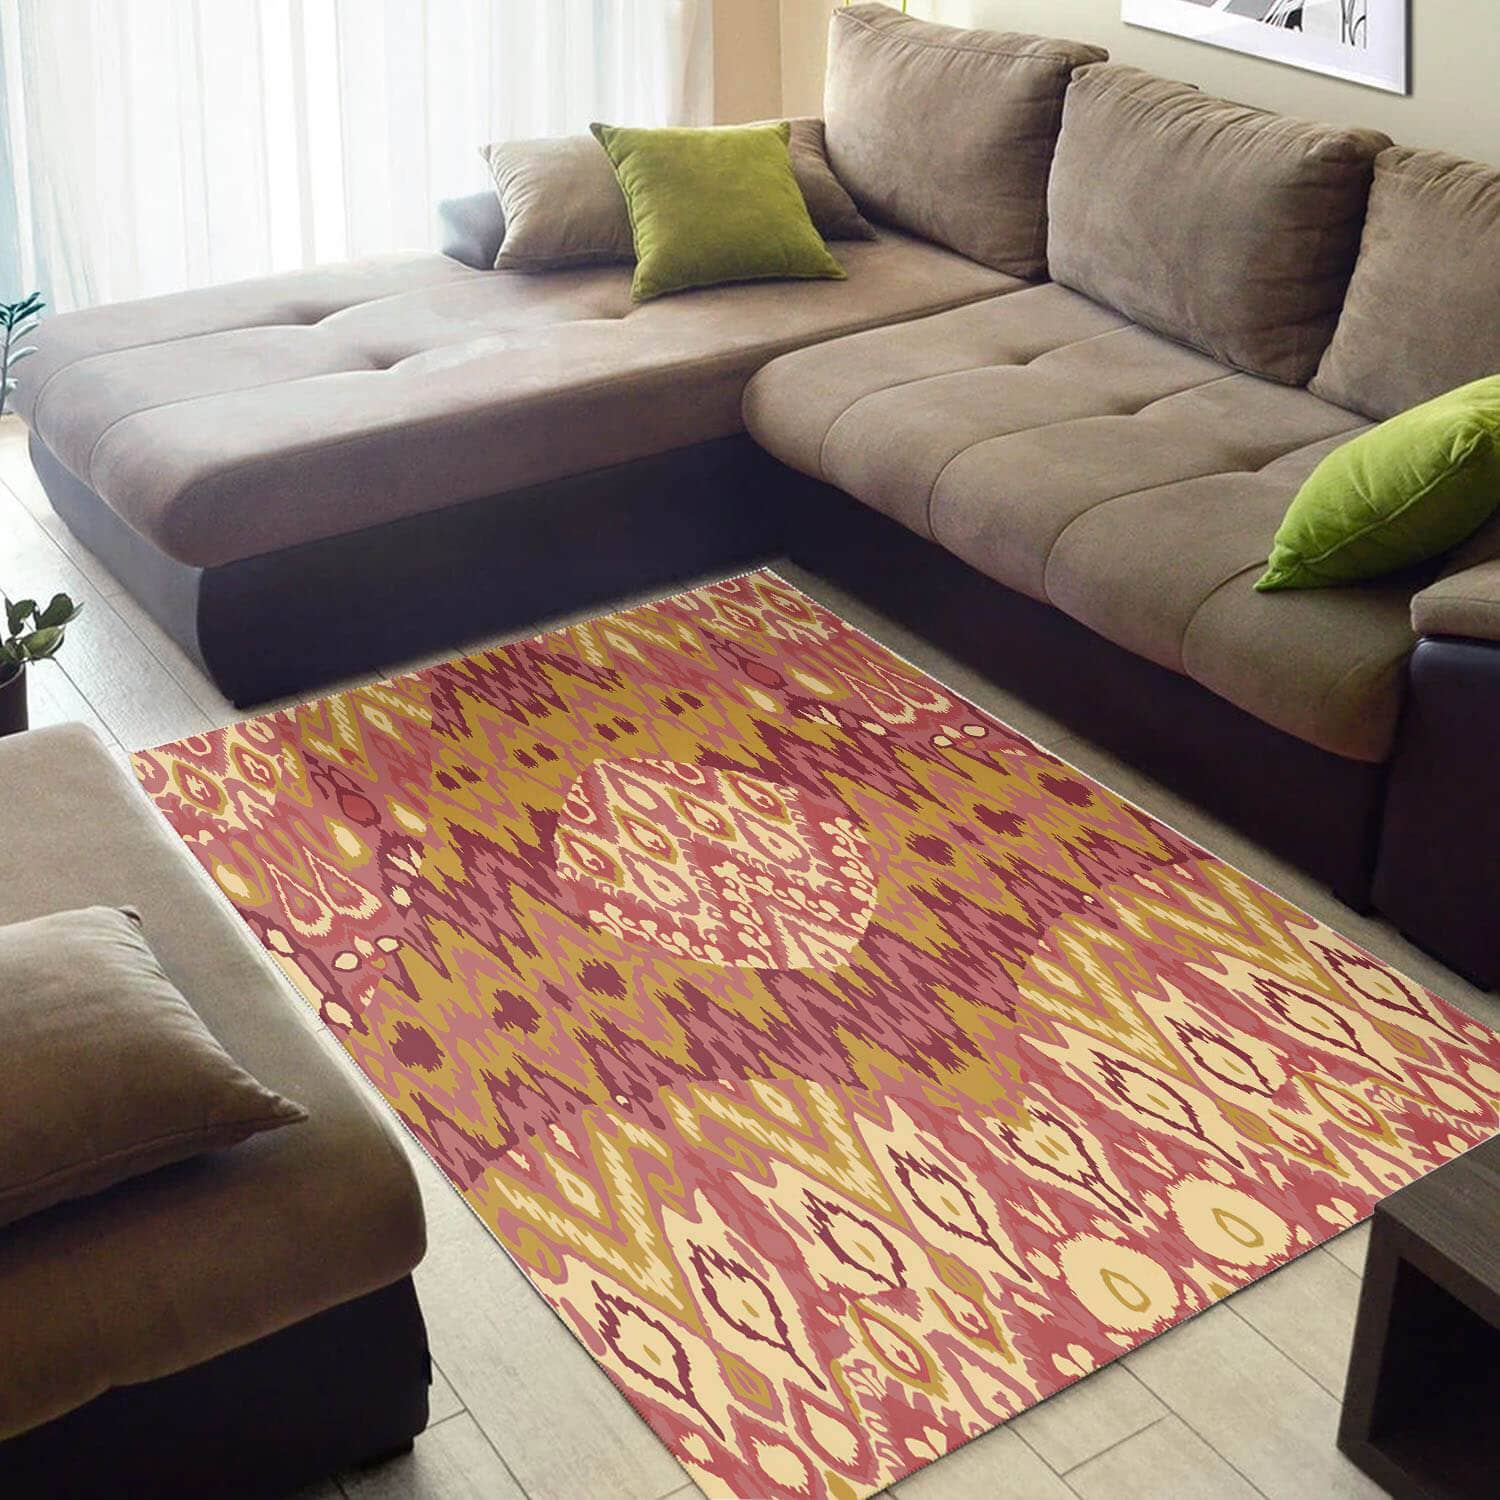 Inspired African Adorable Print Seamless Pattern Carpet Living Room Rug